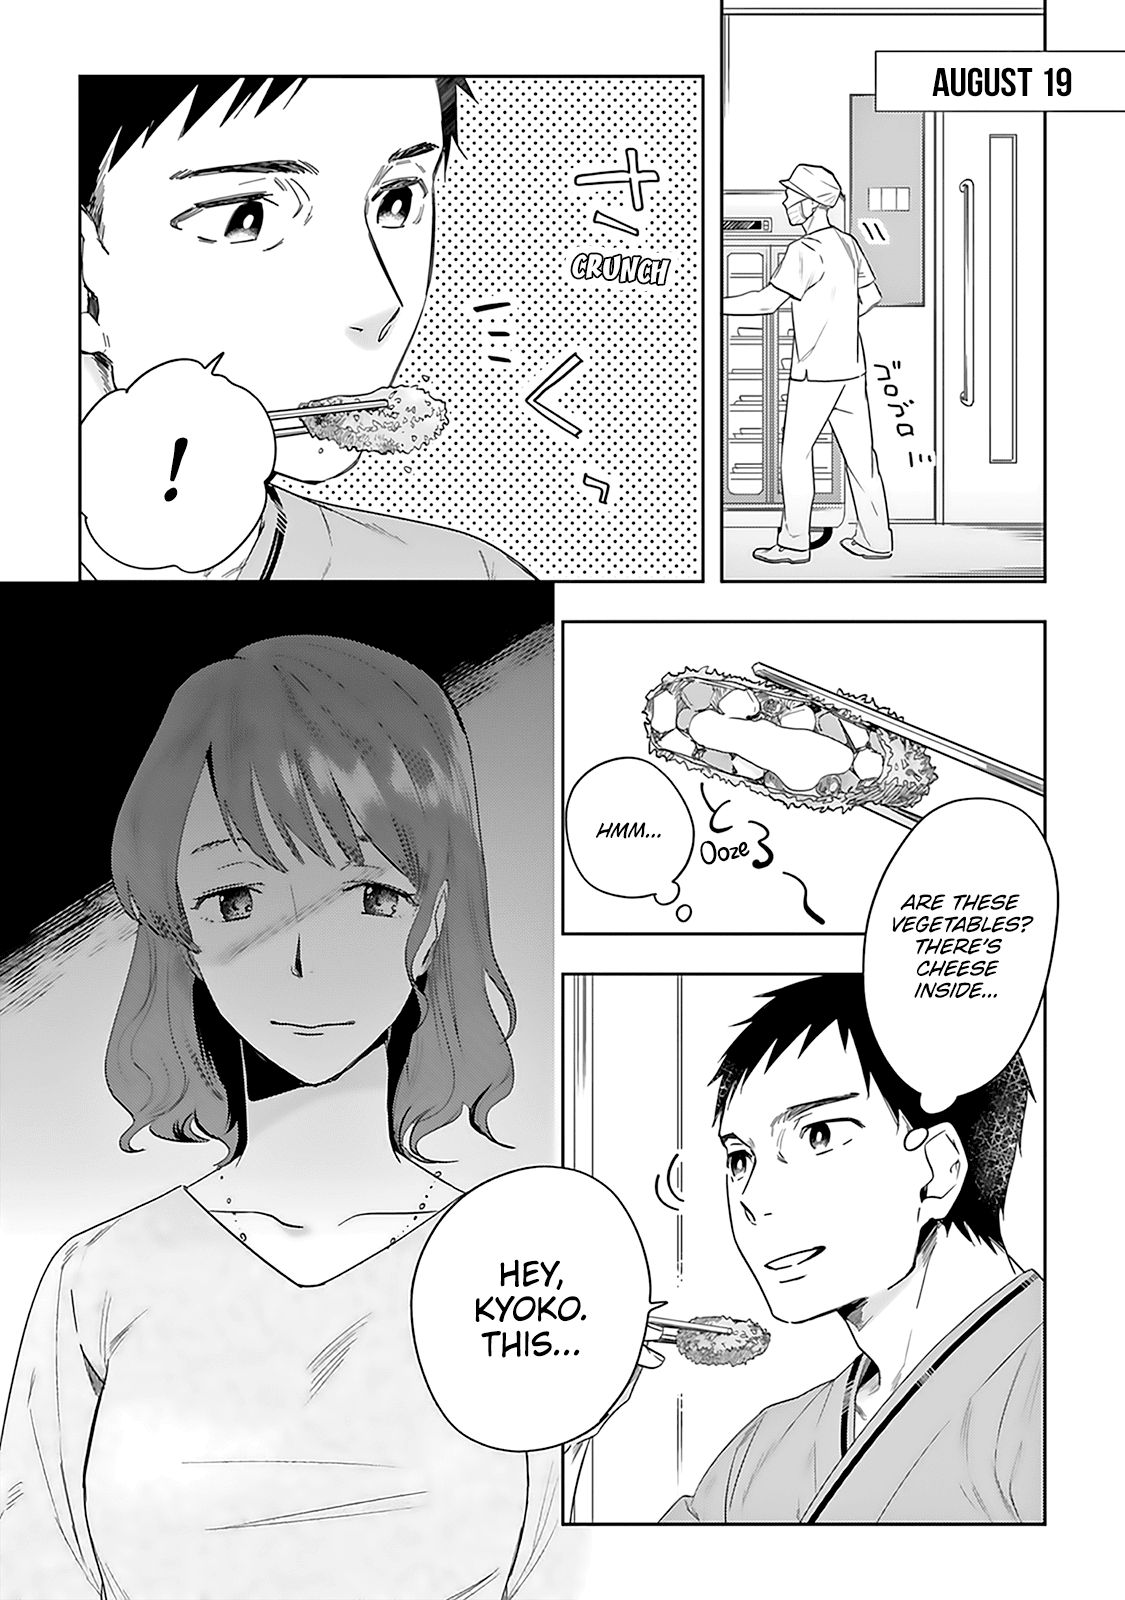 The Last Doctors Think Of You Whenever They Look Up To Cherry Blossoms - Page 2